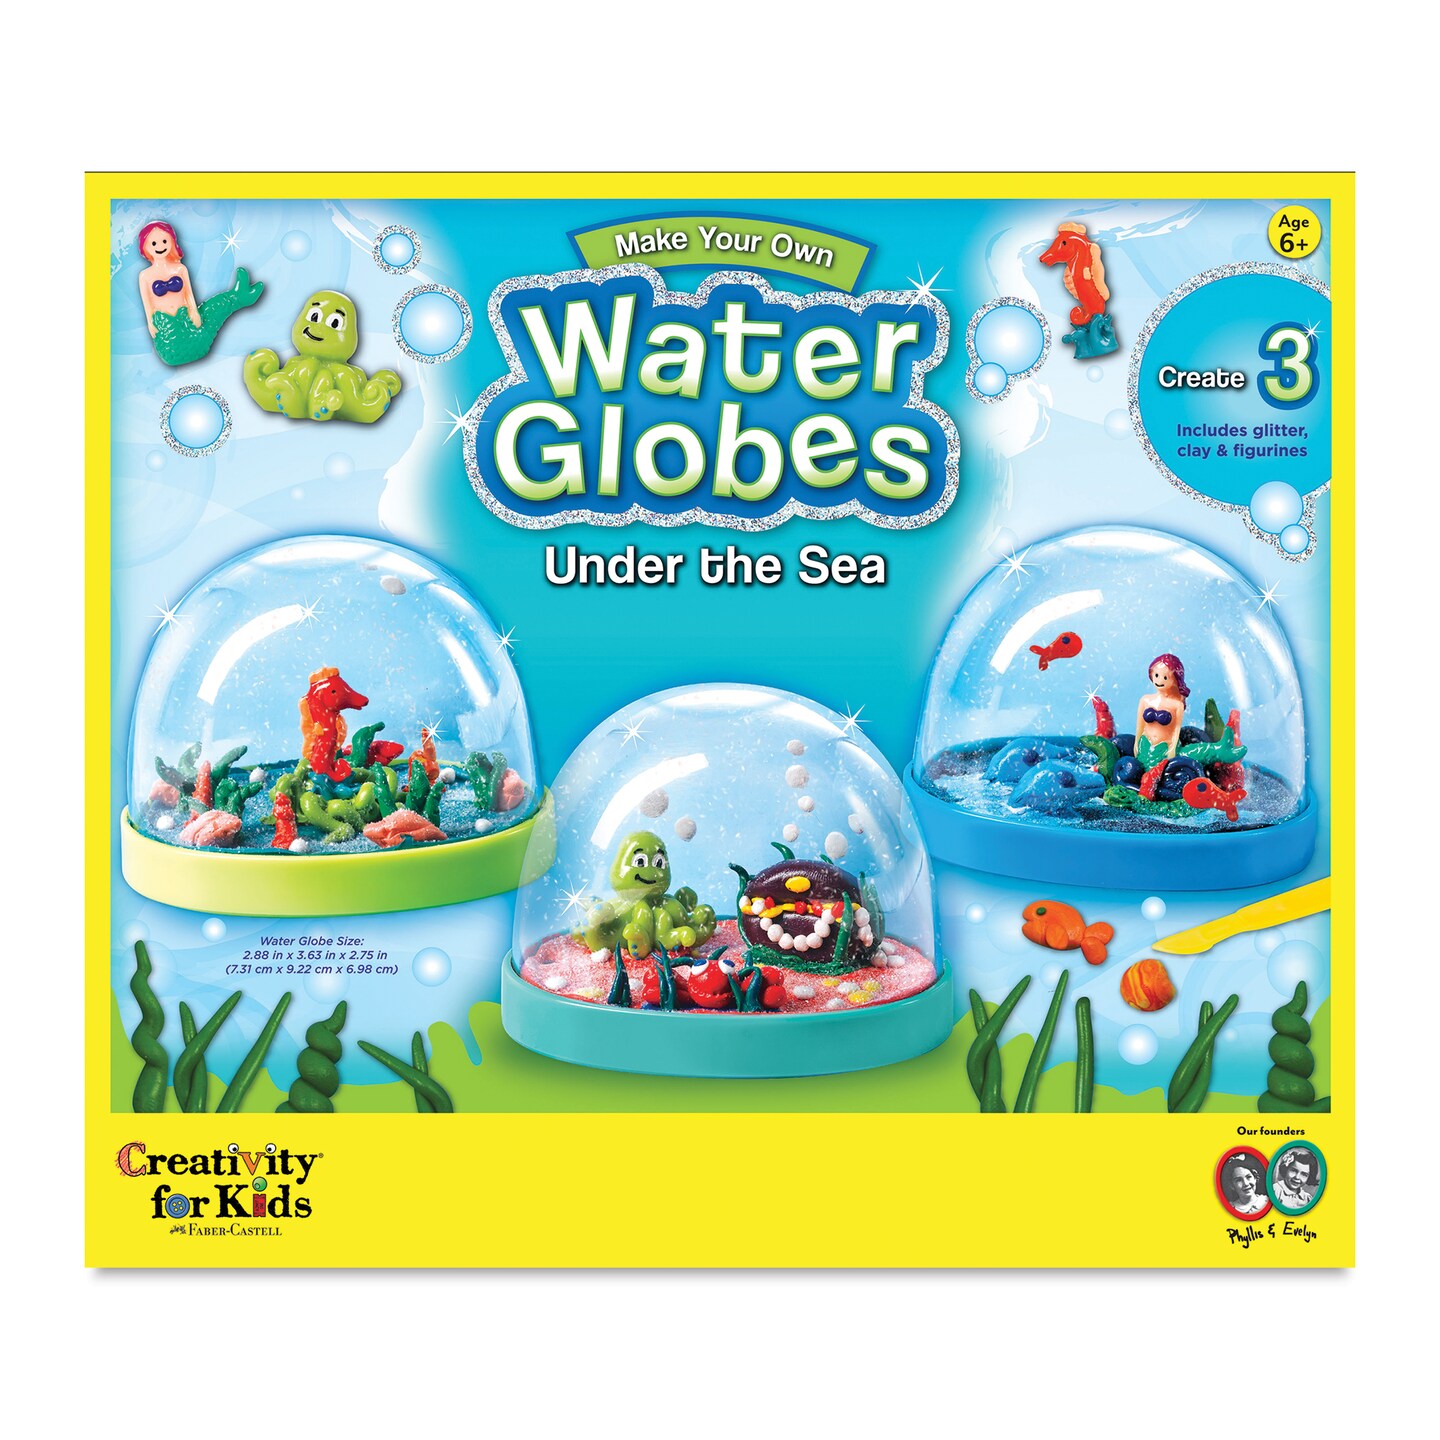 Creativity for Kids Make Your Own Water Globes Kit - Under the Sea